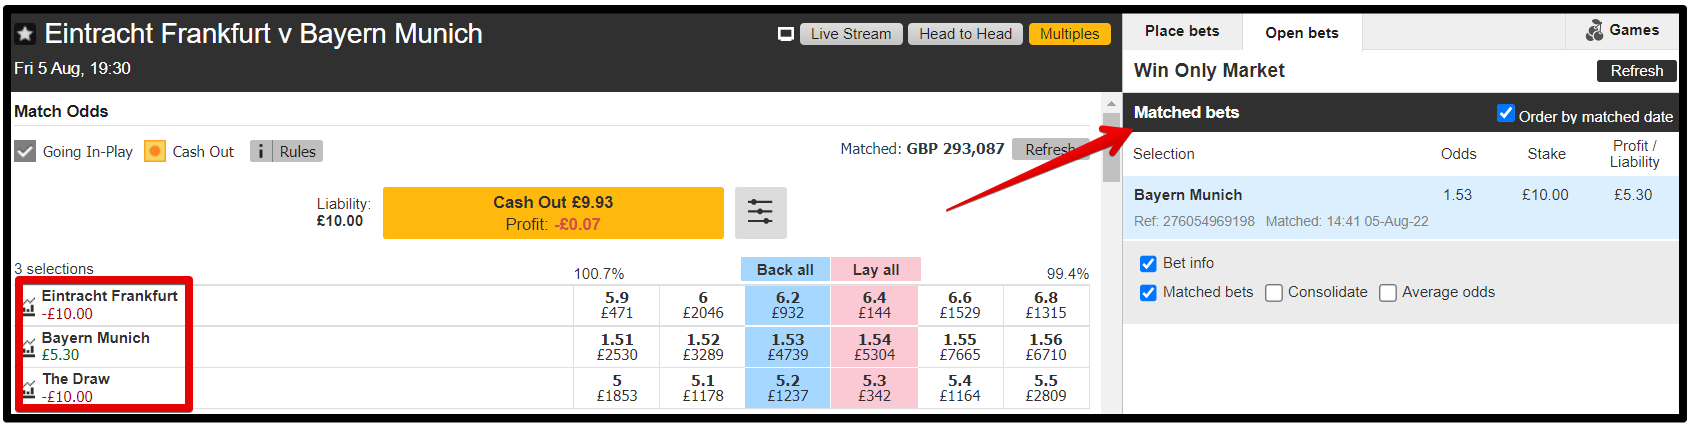 The Betfair exchange displays all your bets and how much you will win or lose